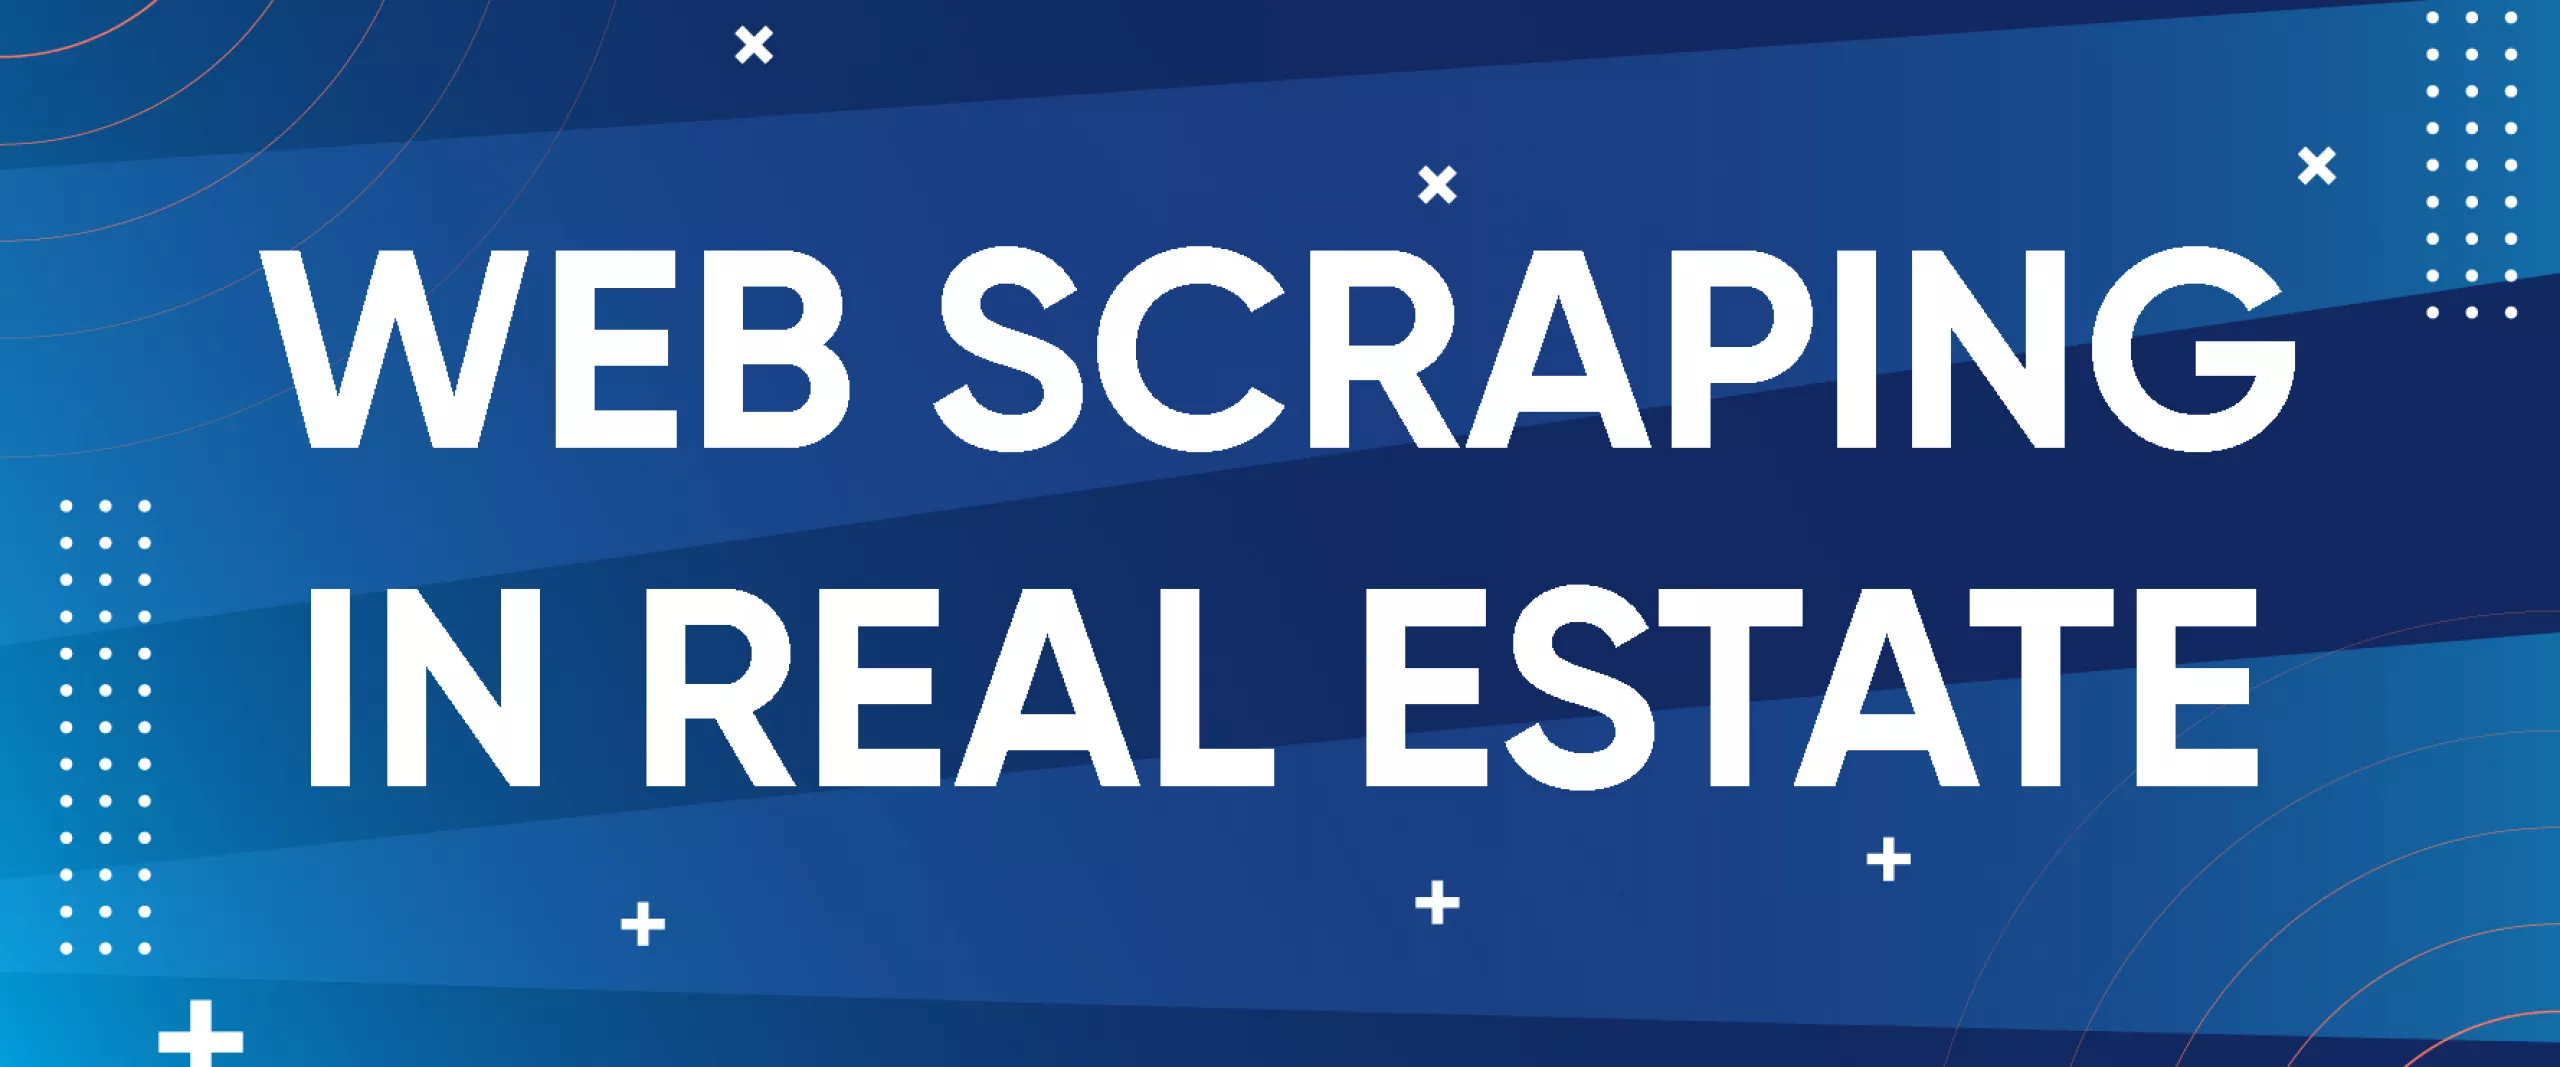 Web Scraping for Real Estate Data: Complete Guide